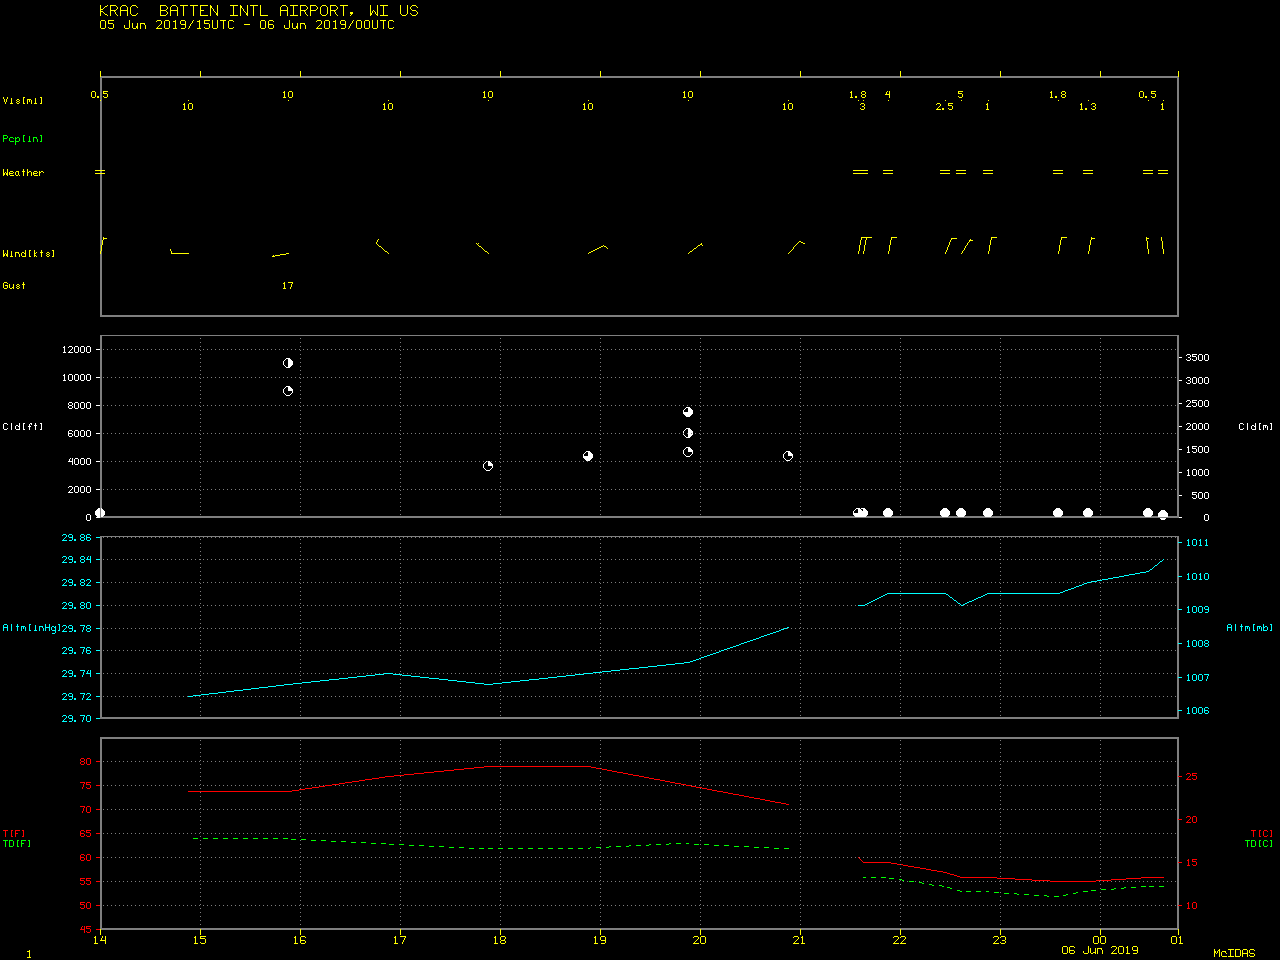 Time series plot of surface reports from Racine Batten International Airport [click to enlarge]